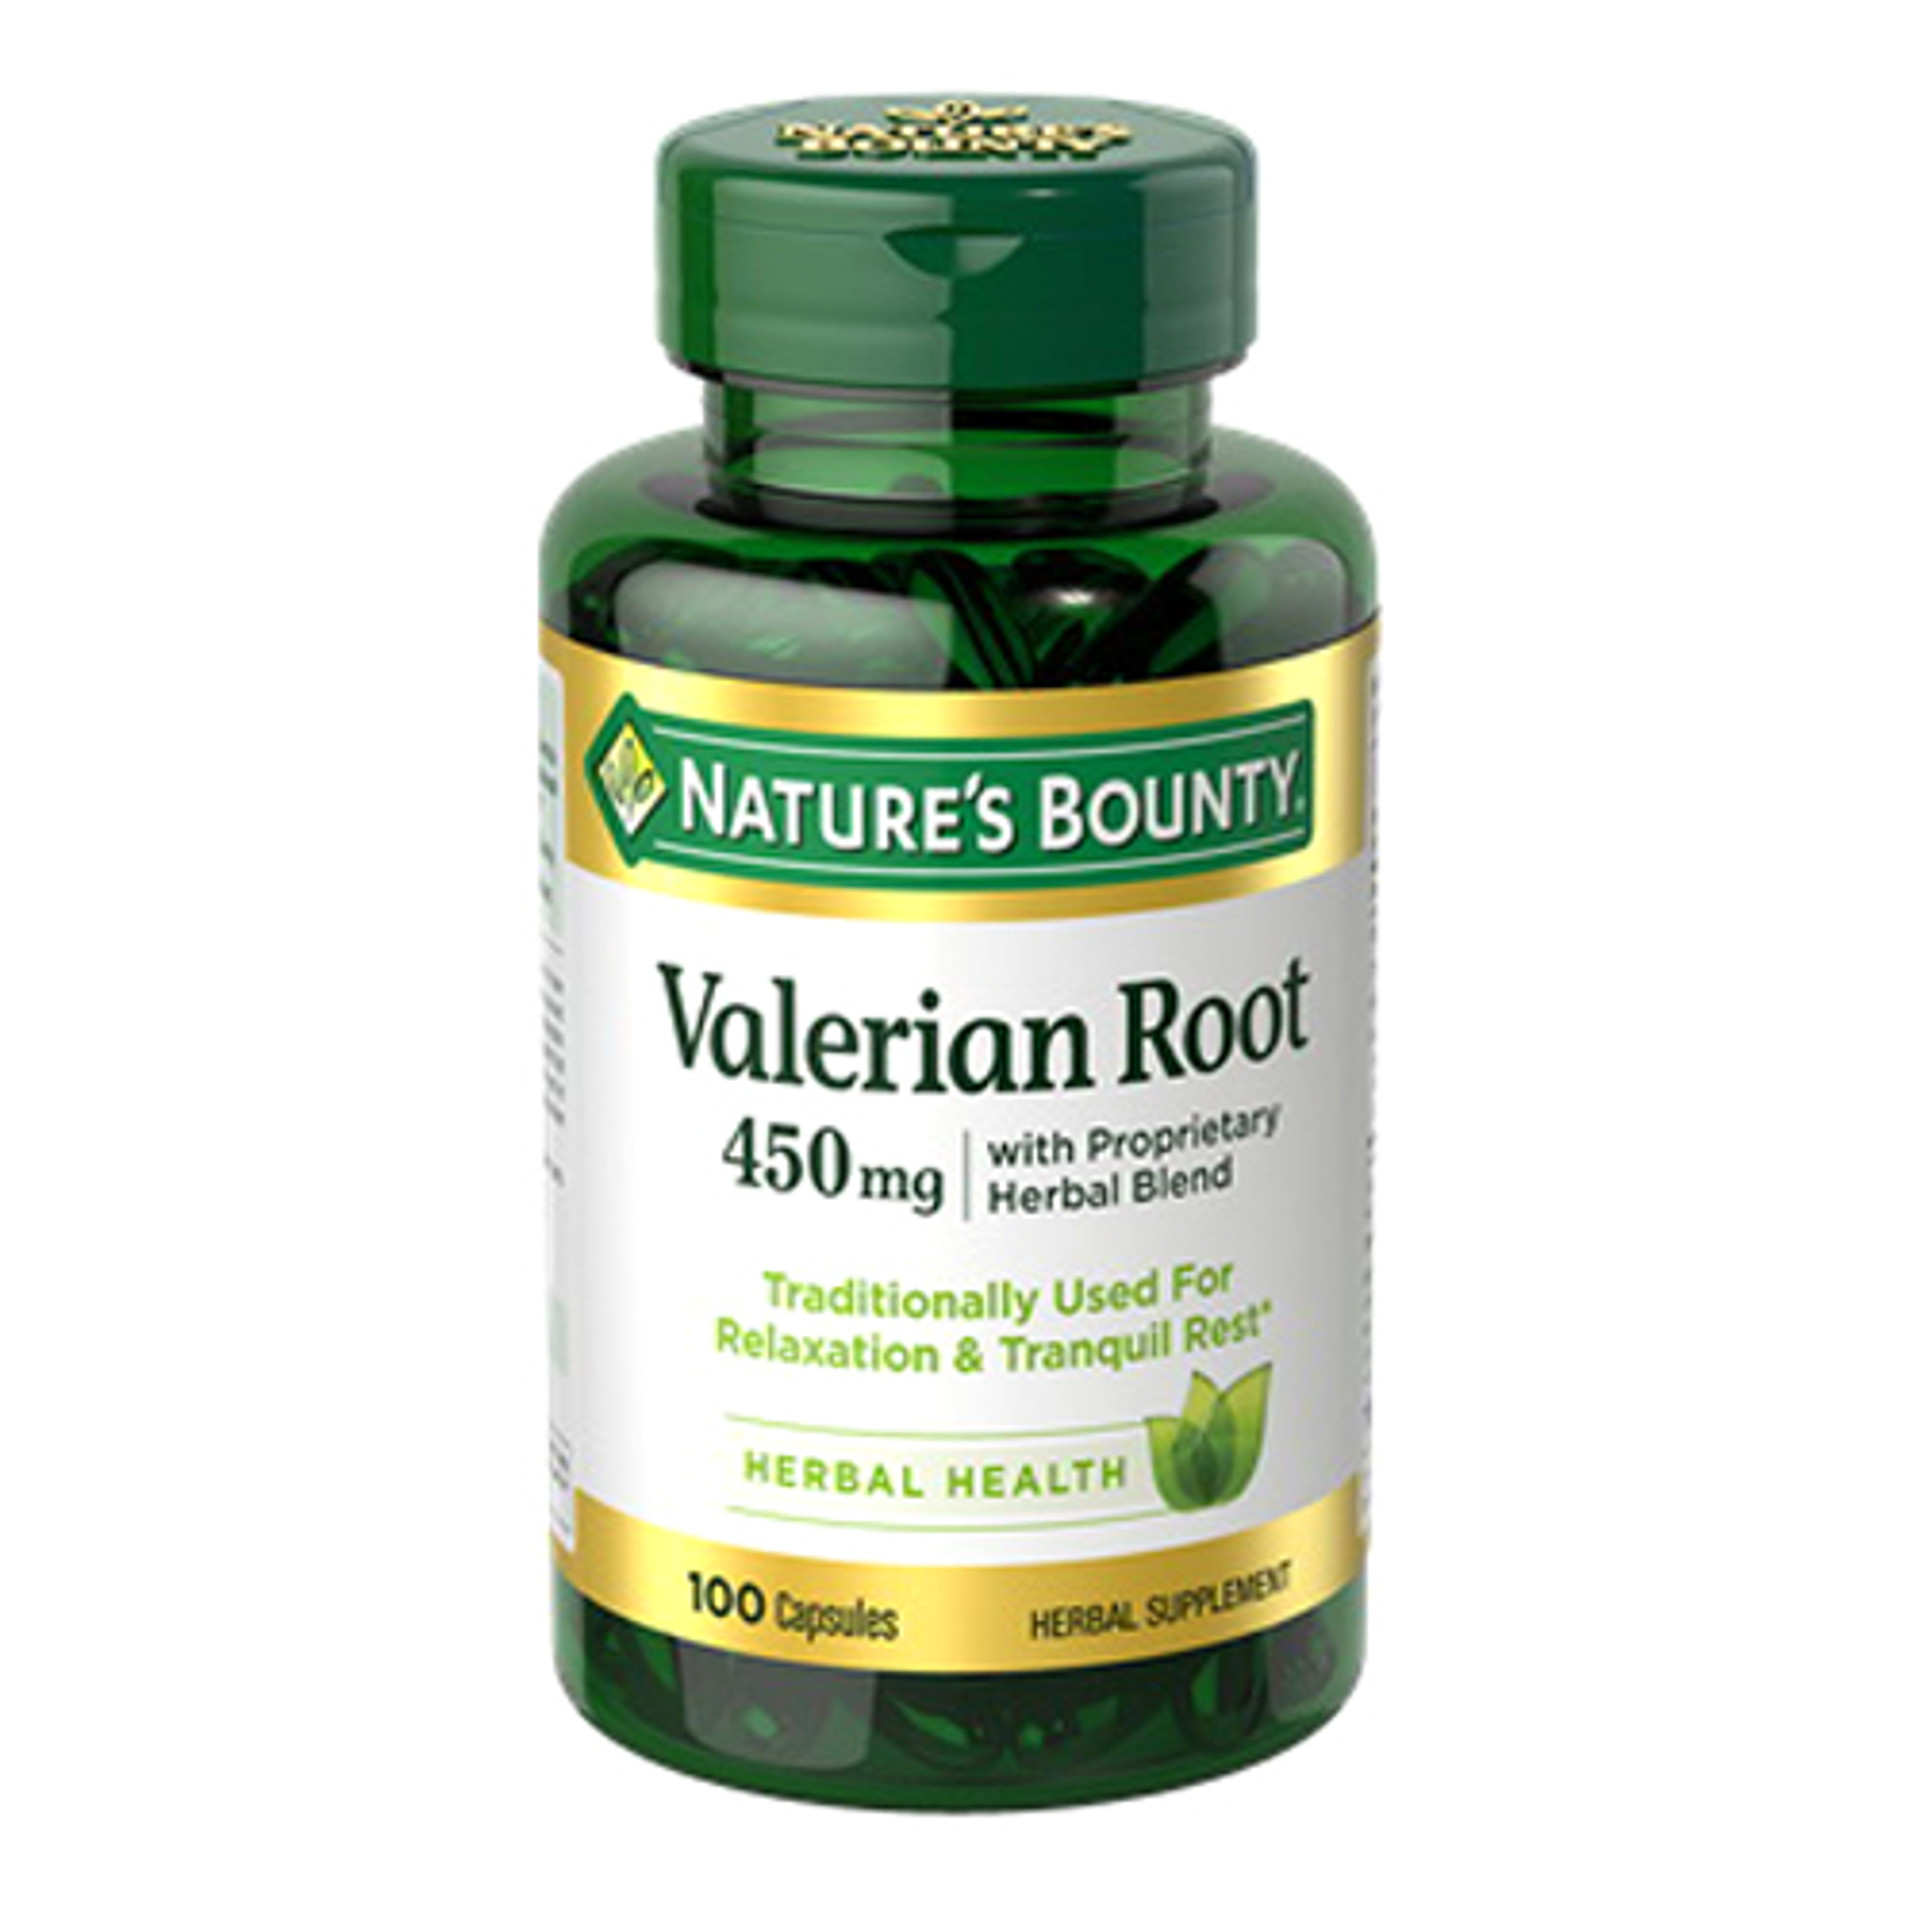 Valerian Root 450 Mg Capsules, By Natures Bounty - 100 Capsules ...